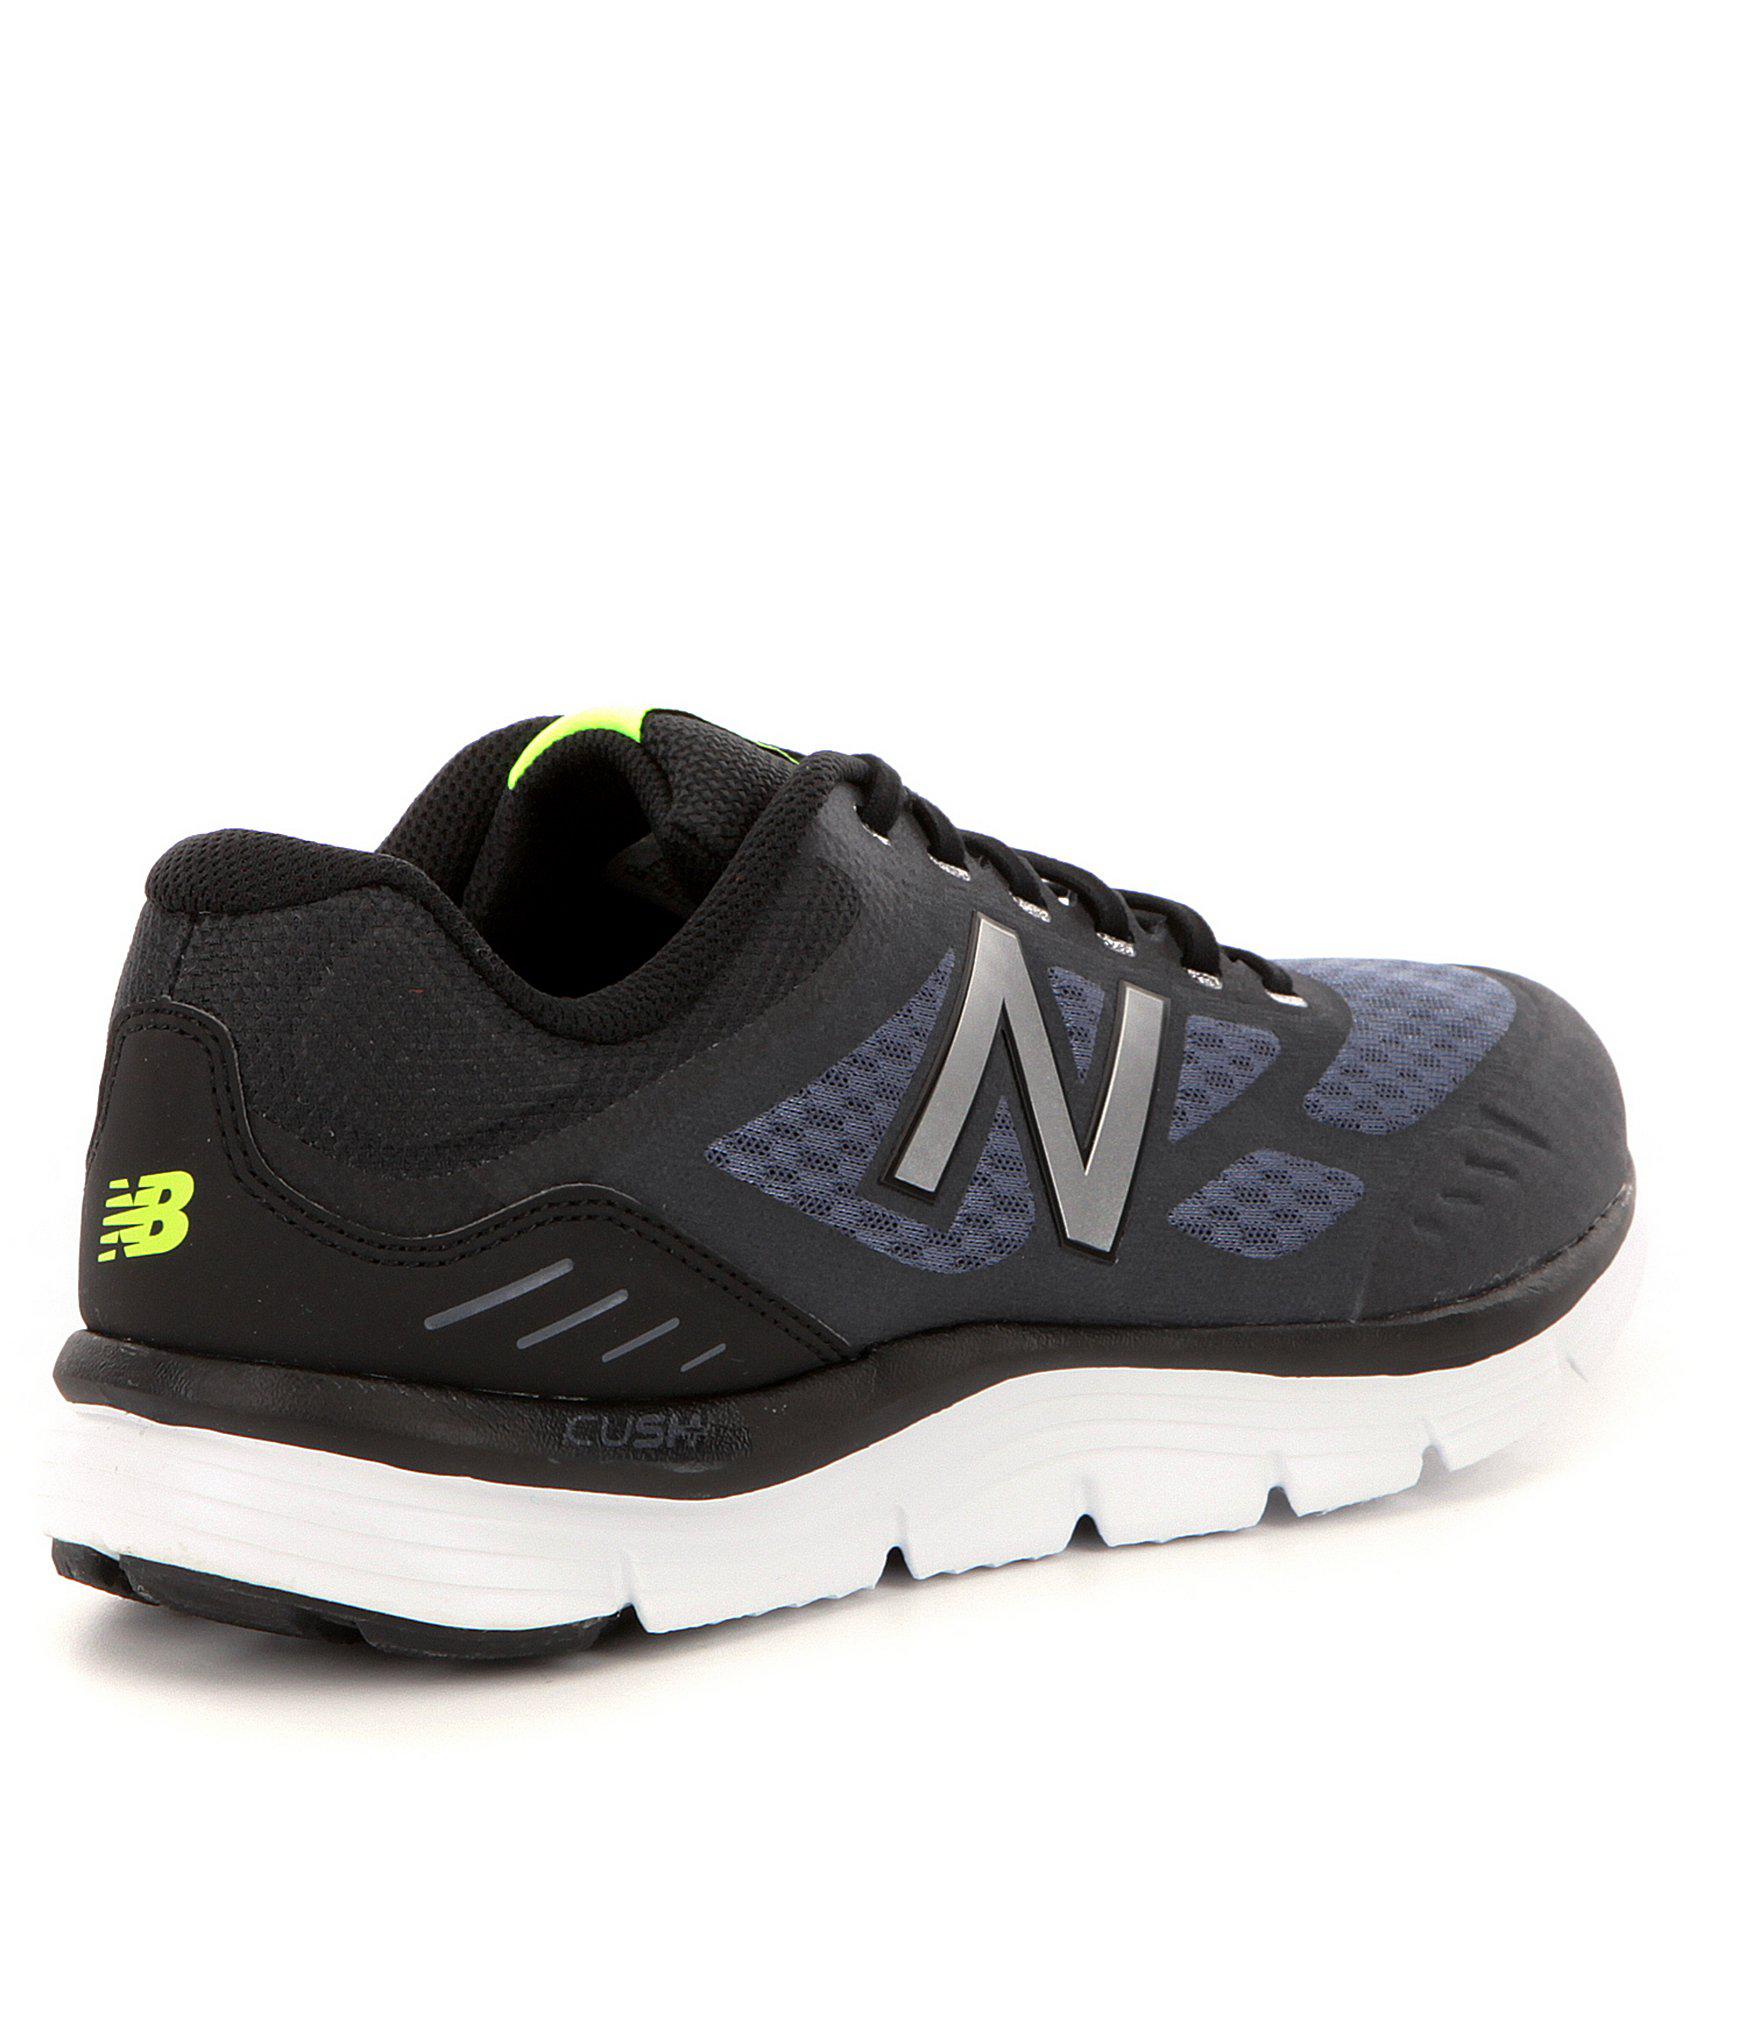 New Balance Synthetic Men ́s 775 Mesh Lace-up Running Shoes in Black ...